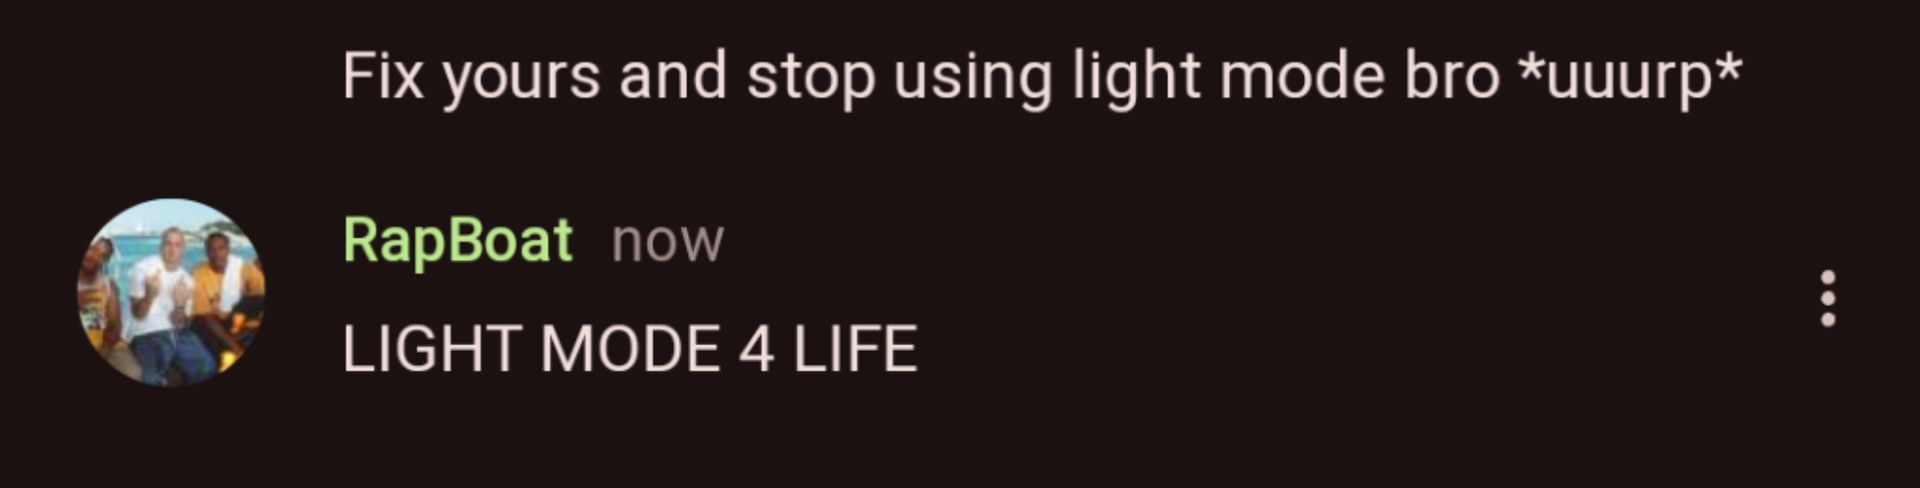 Fix yours and stop using light mode bro *uuurp*
RapBoat now
LIGHT MODE 4 LIFE